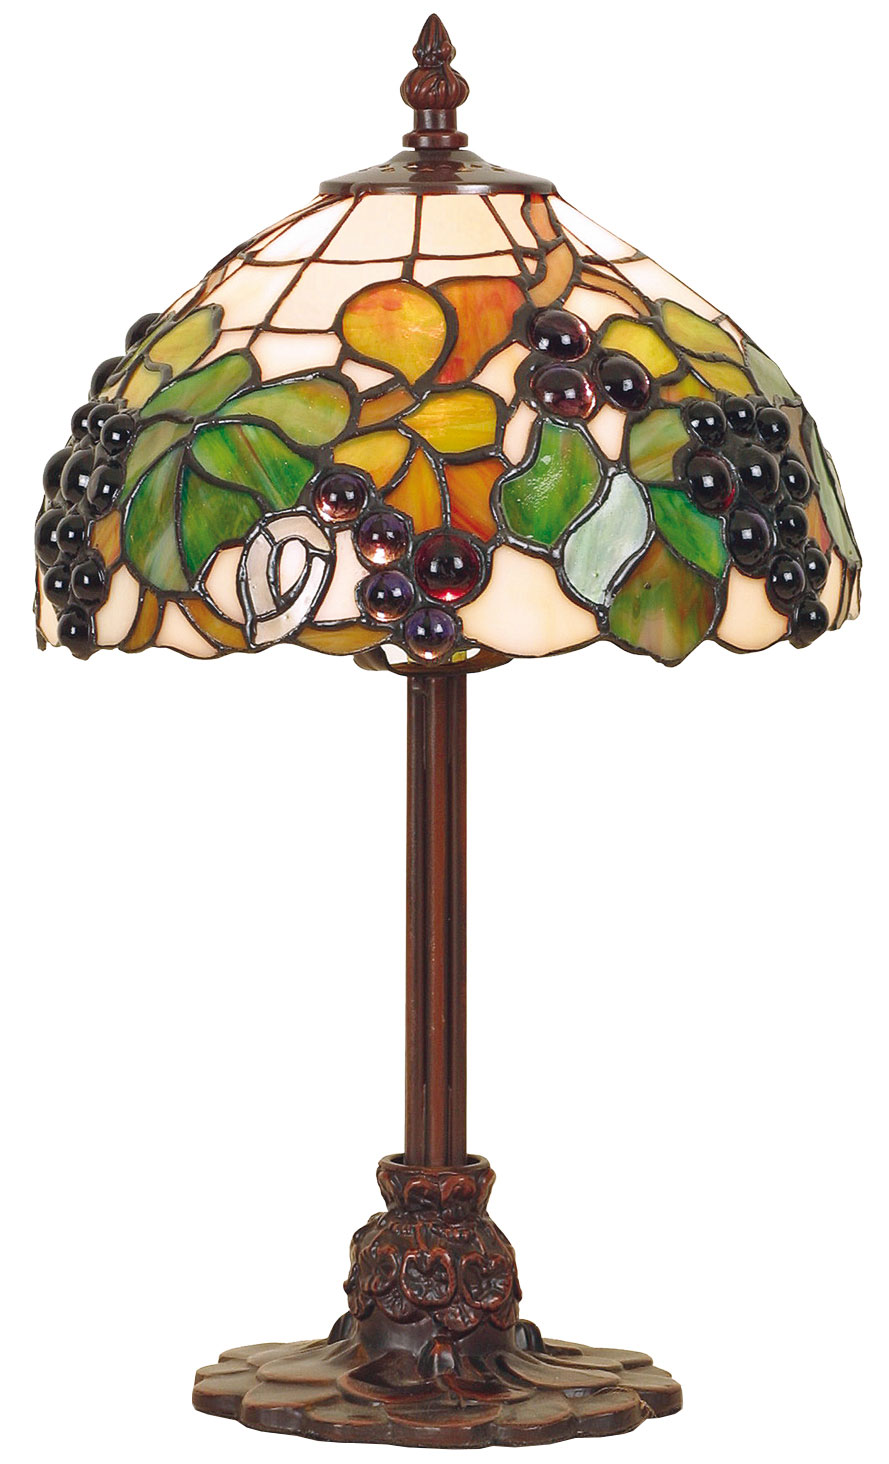 Table lamp "Wine" - after Louis C. Tiffany